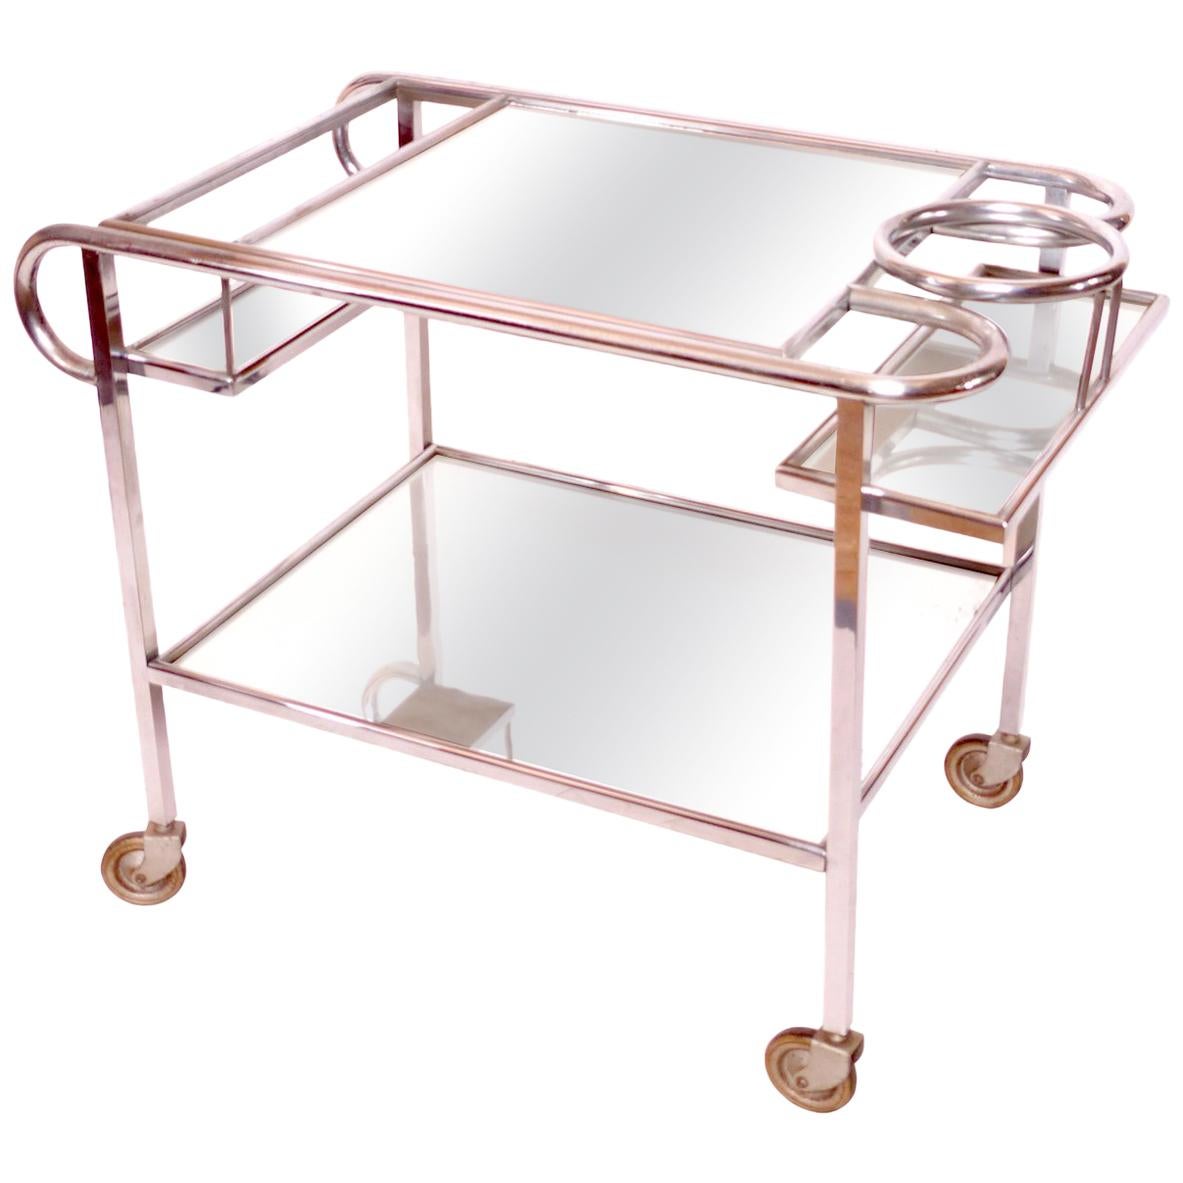 1930s French Art Deco Bar Cart in Chrome with original Mirrors For Sale